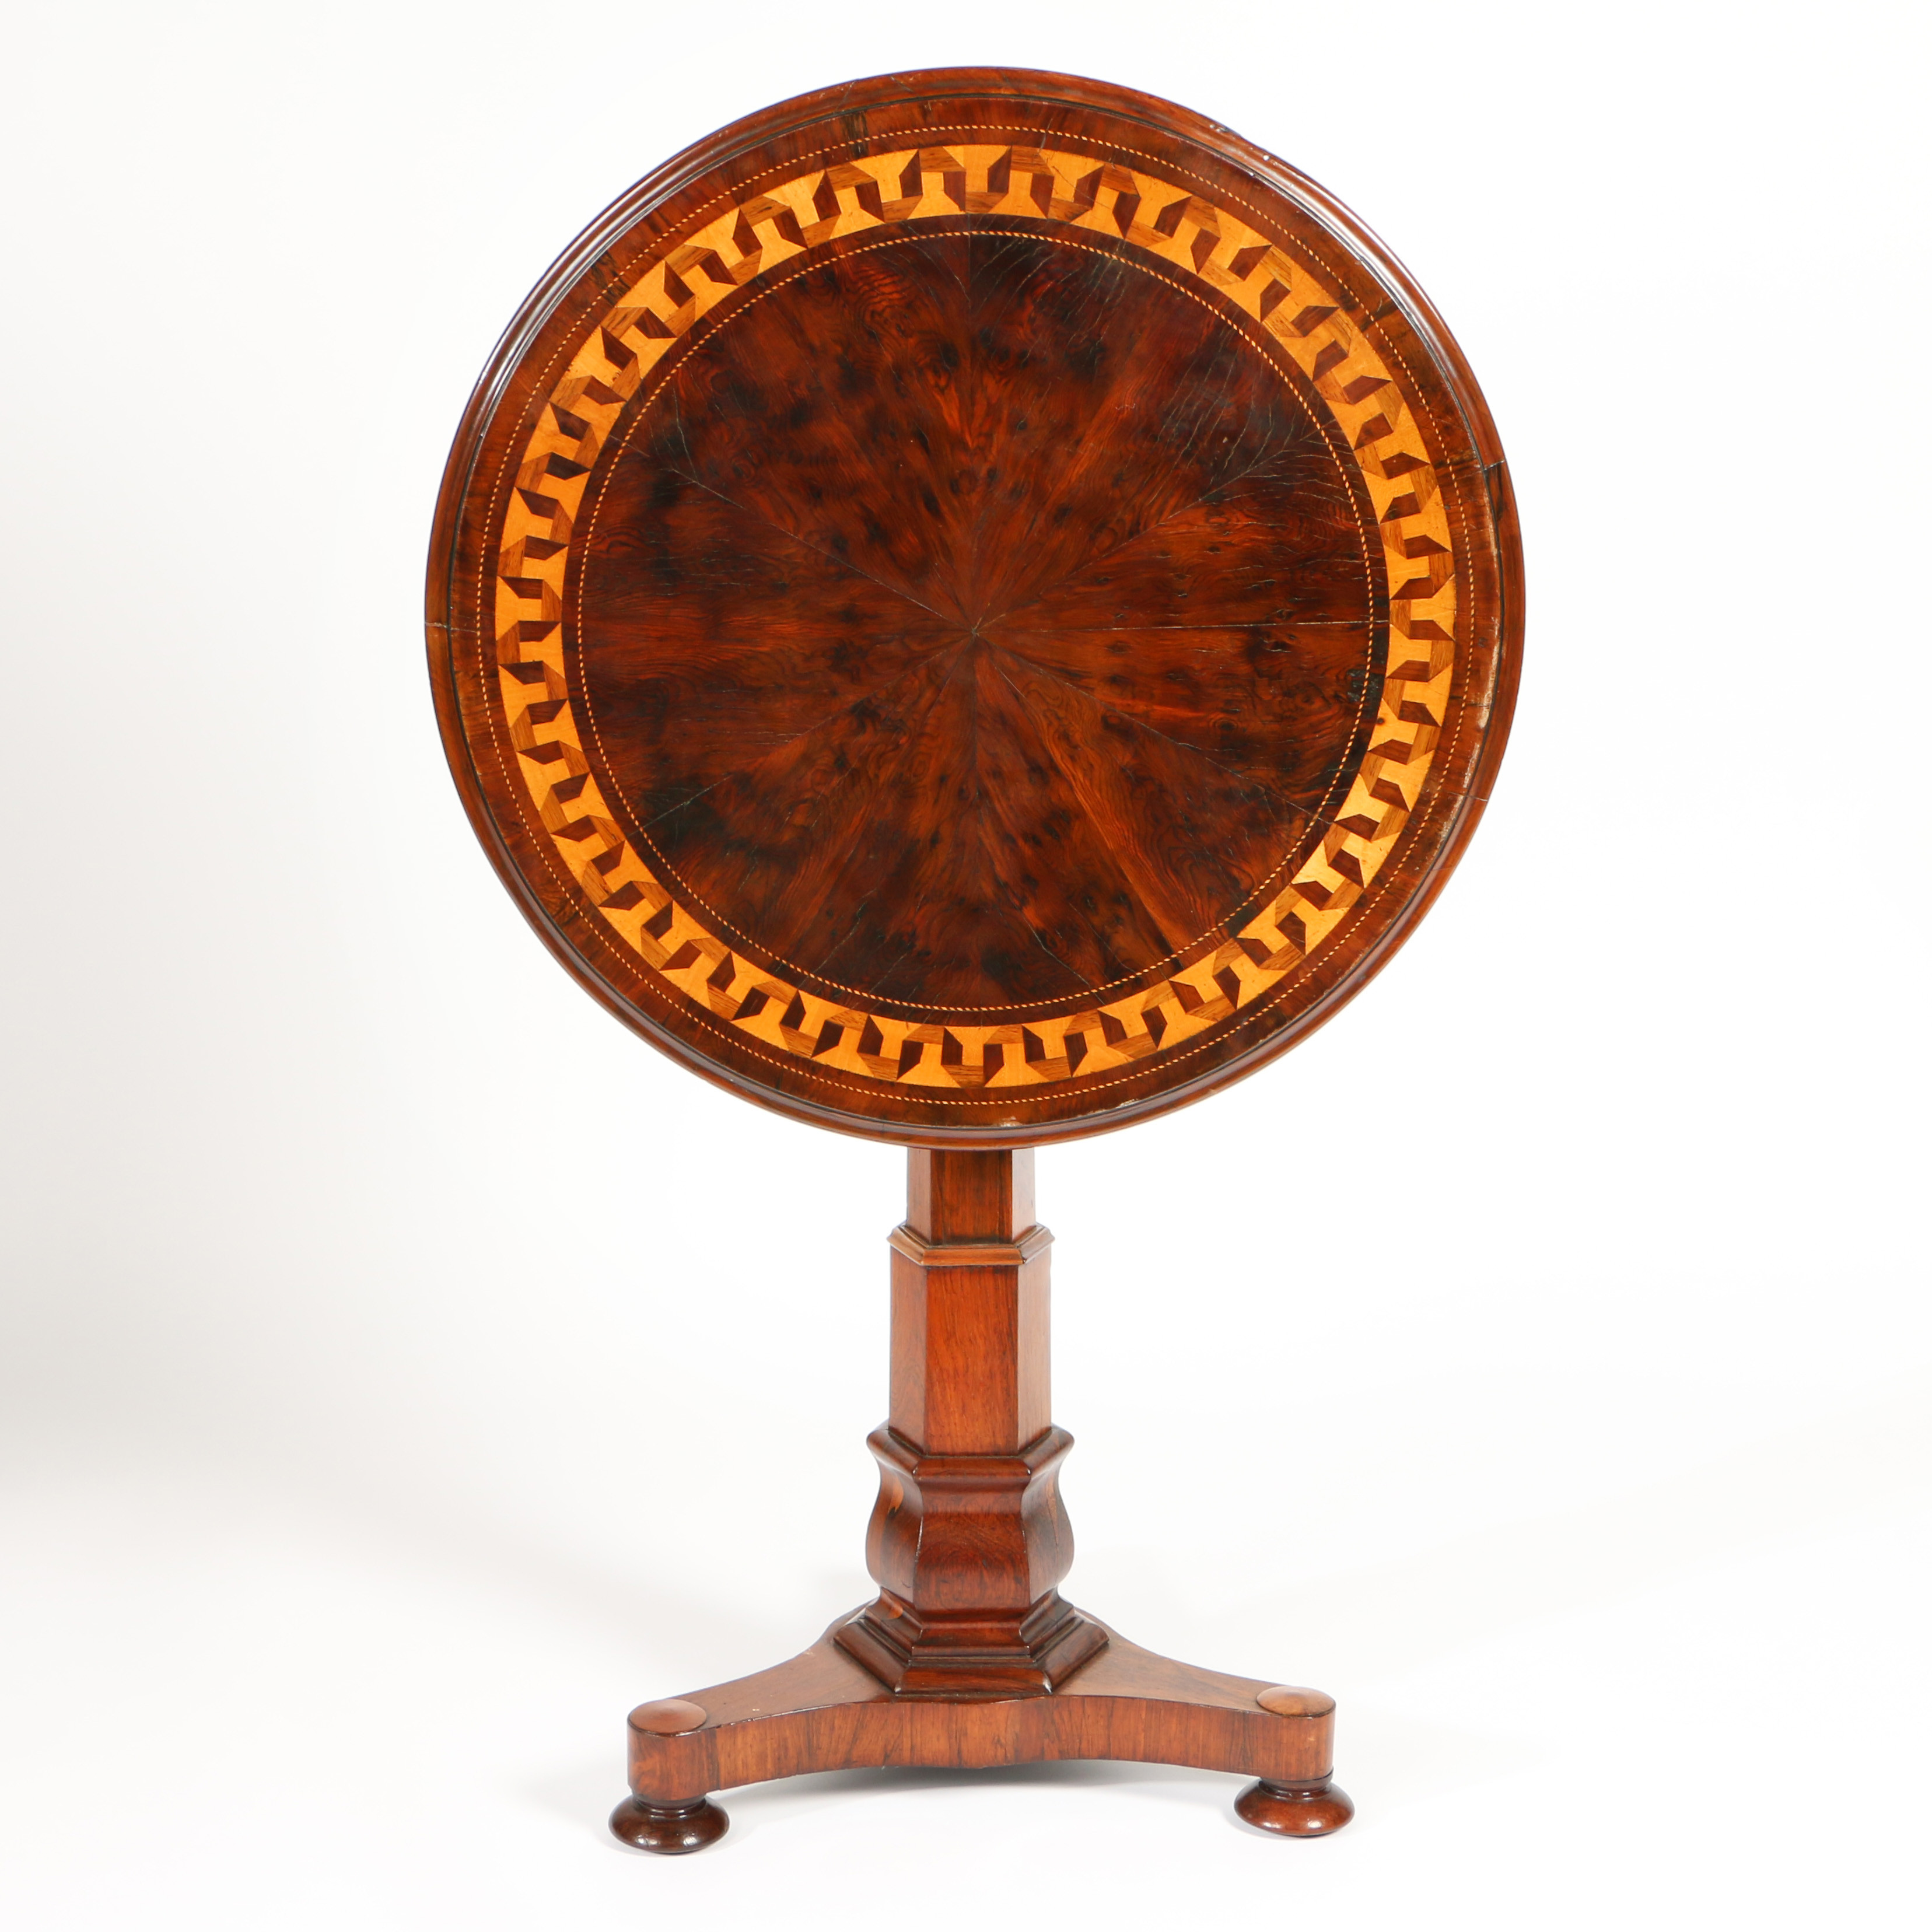 A 19TH CENTURY OCCASIONAL TABLE, IN THE MANNER OF GEORGE BULLOCK.